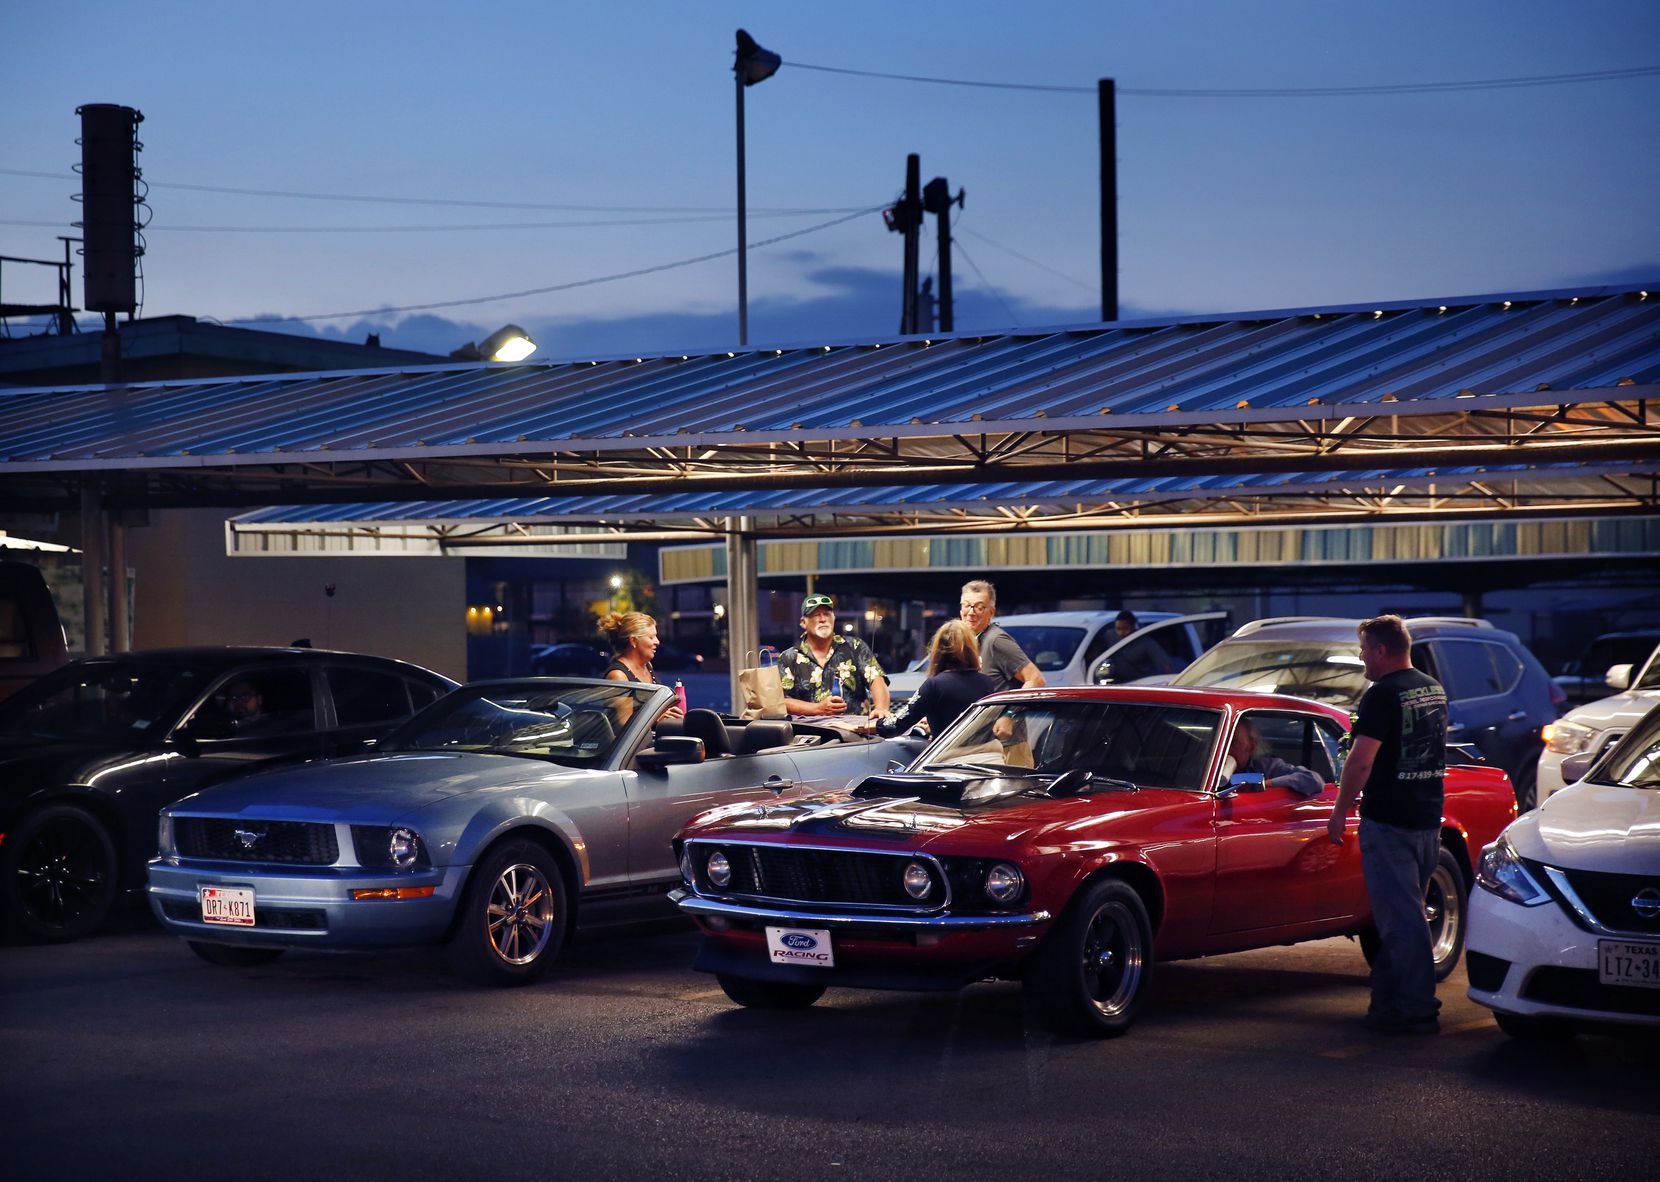 At dusk, people visit around a pair of Ford Mustangs at Keller's Drive-In. The burger and...